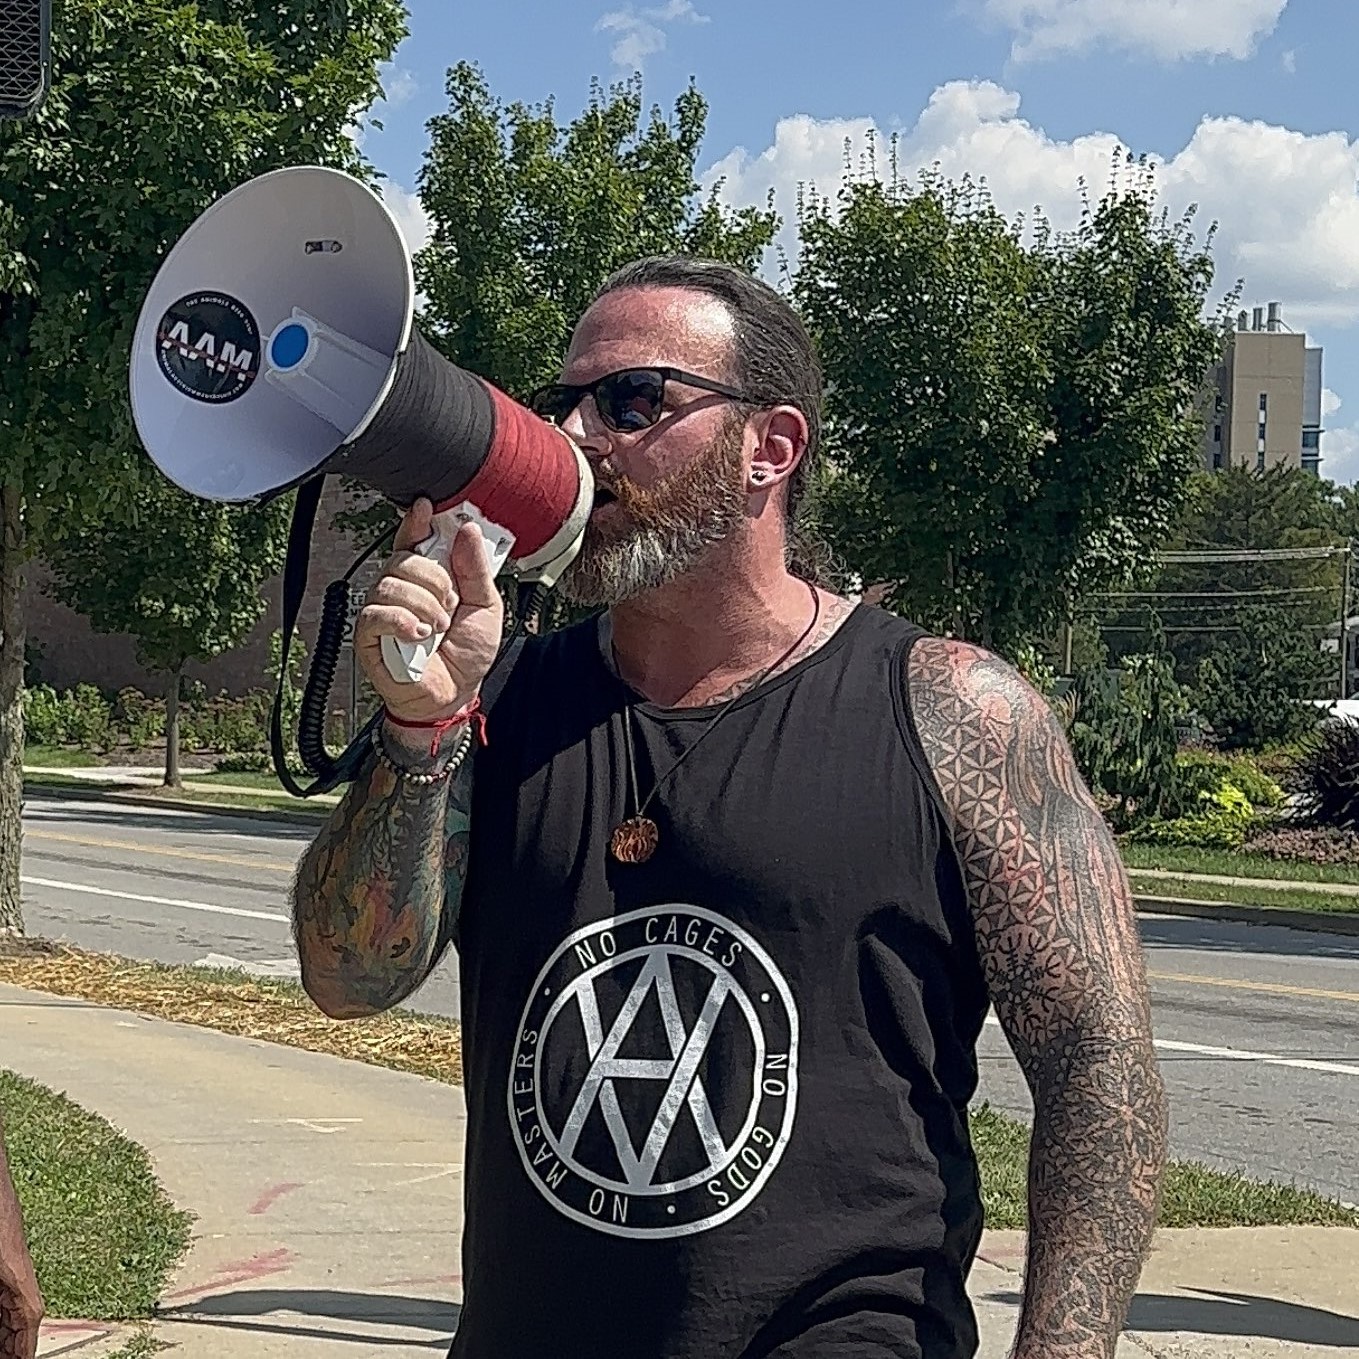 Adam at Ohio Occurrence speaking into a megaphone